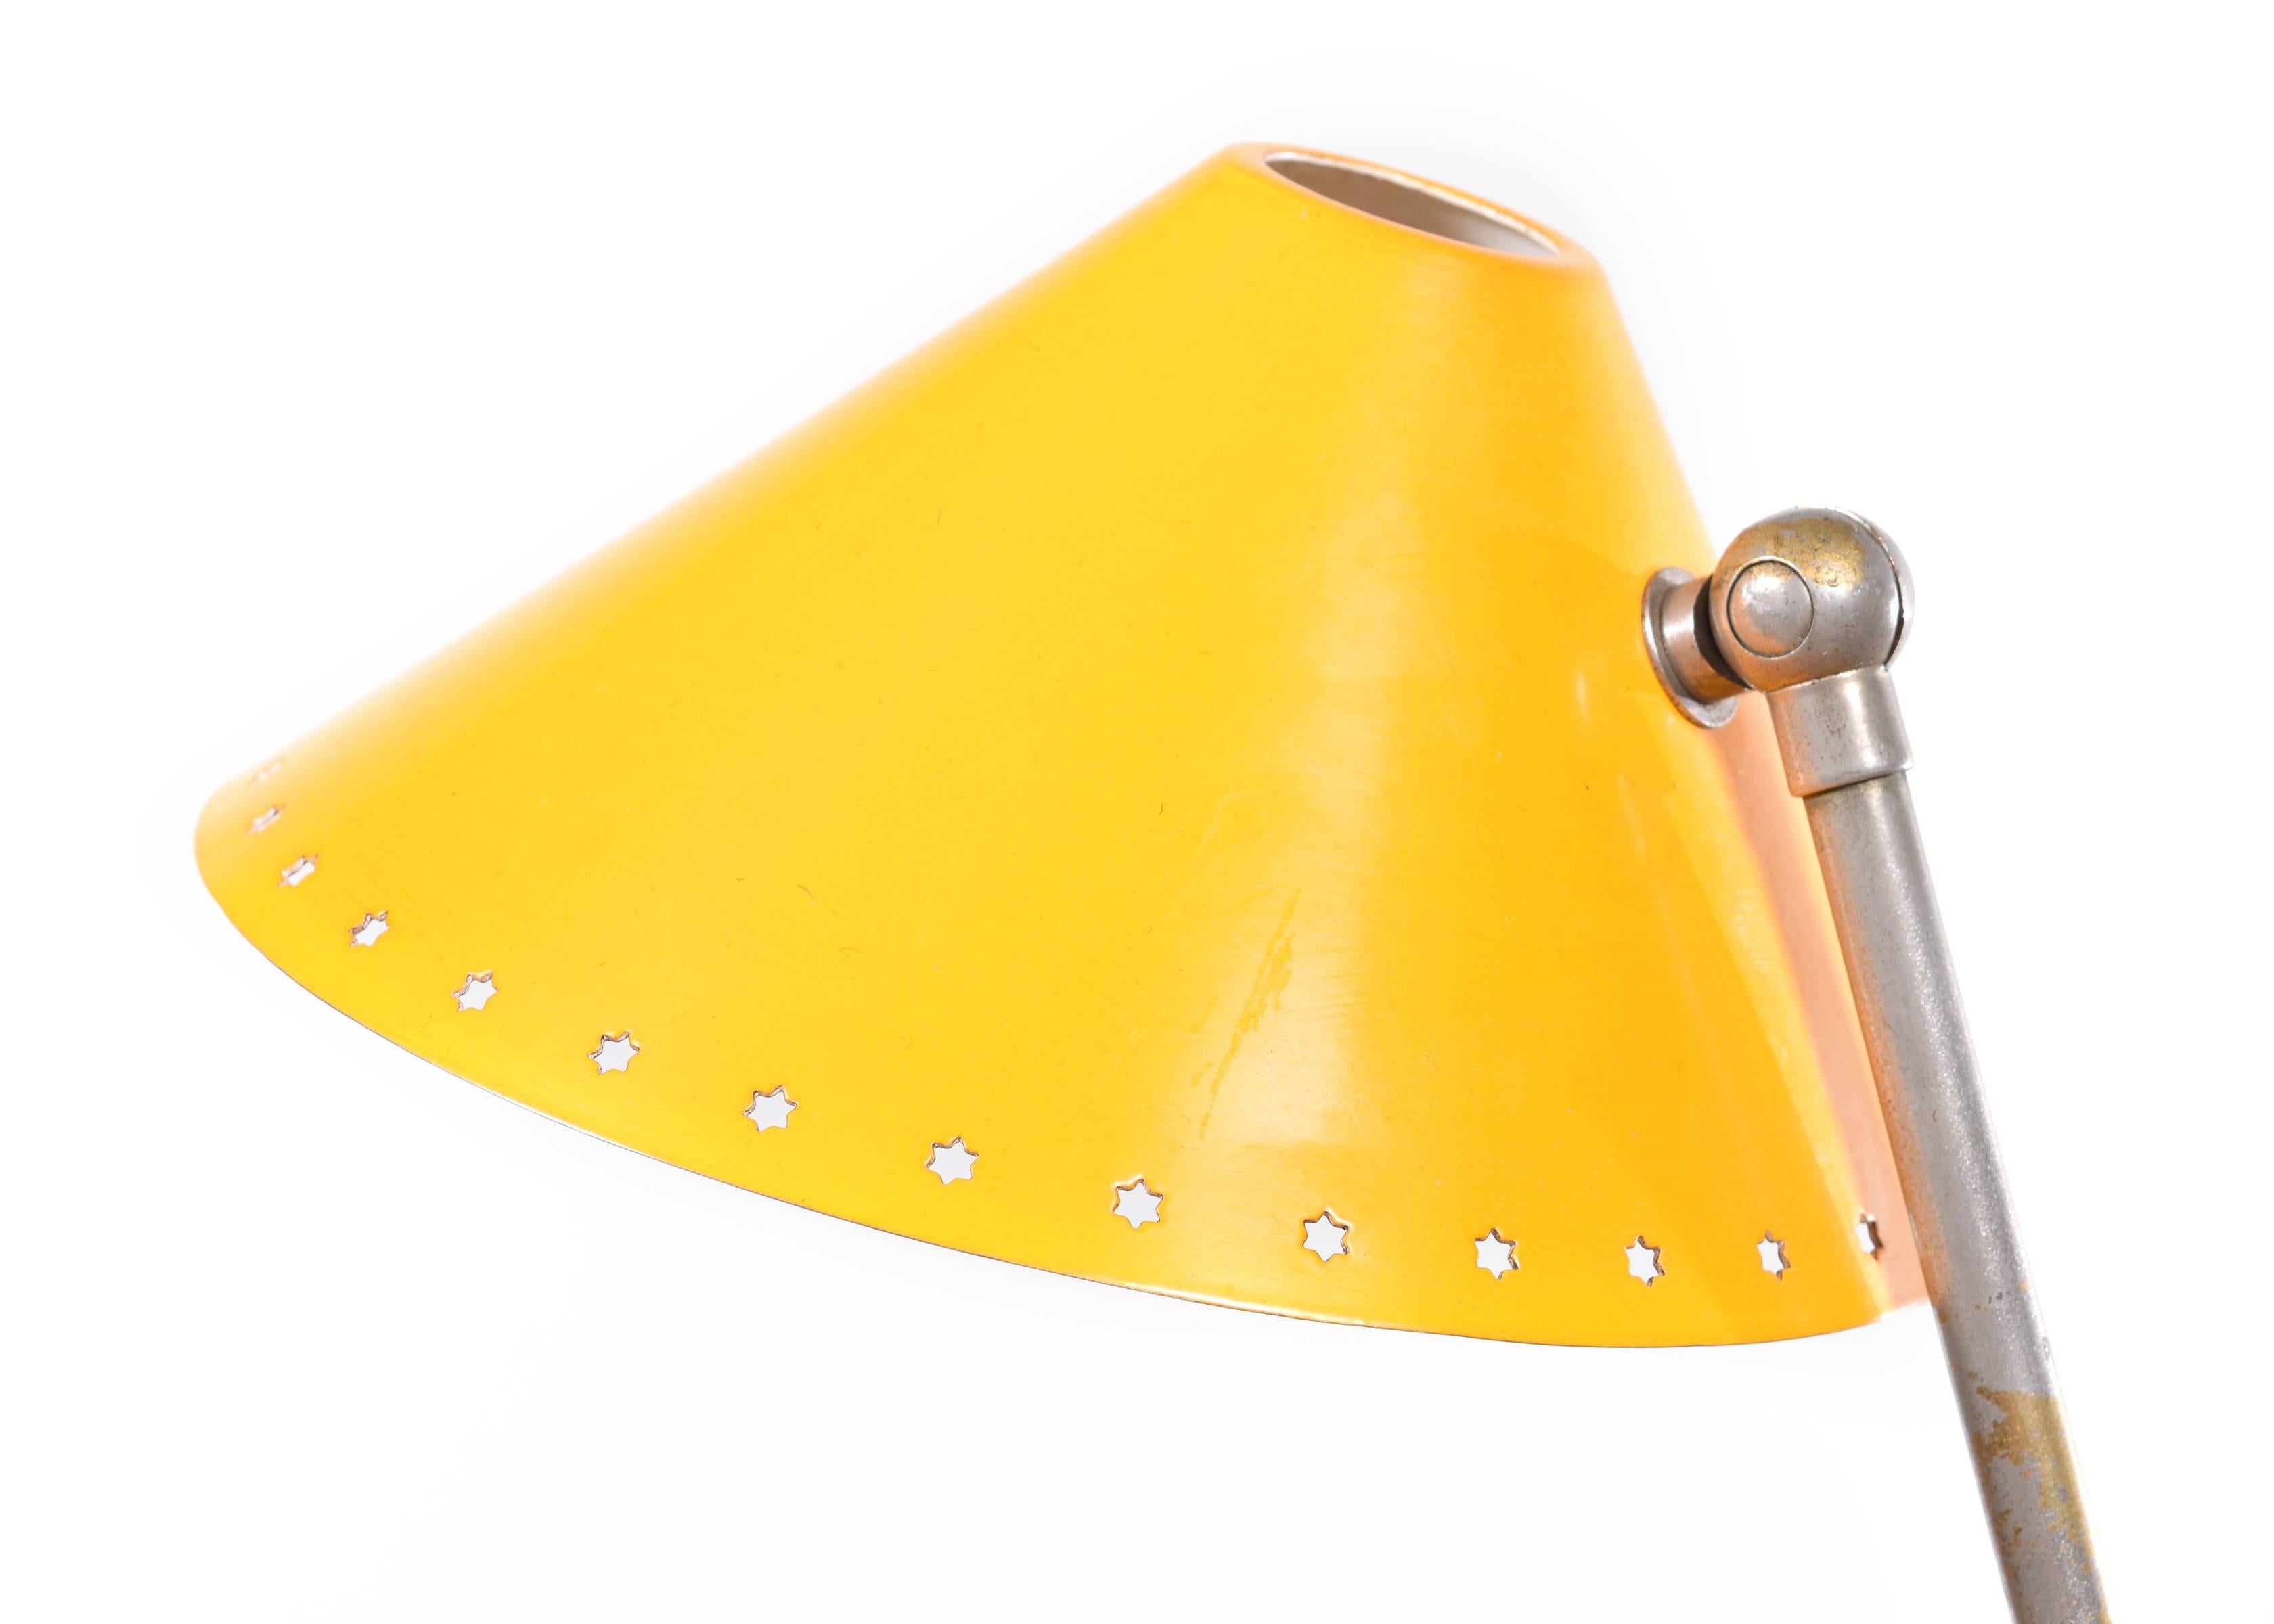 Mid-20th Century Yellow Pinocchio Lamp by H. Busquet for Hala Zeist, Netherlands